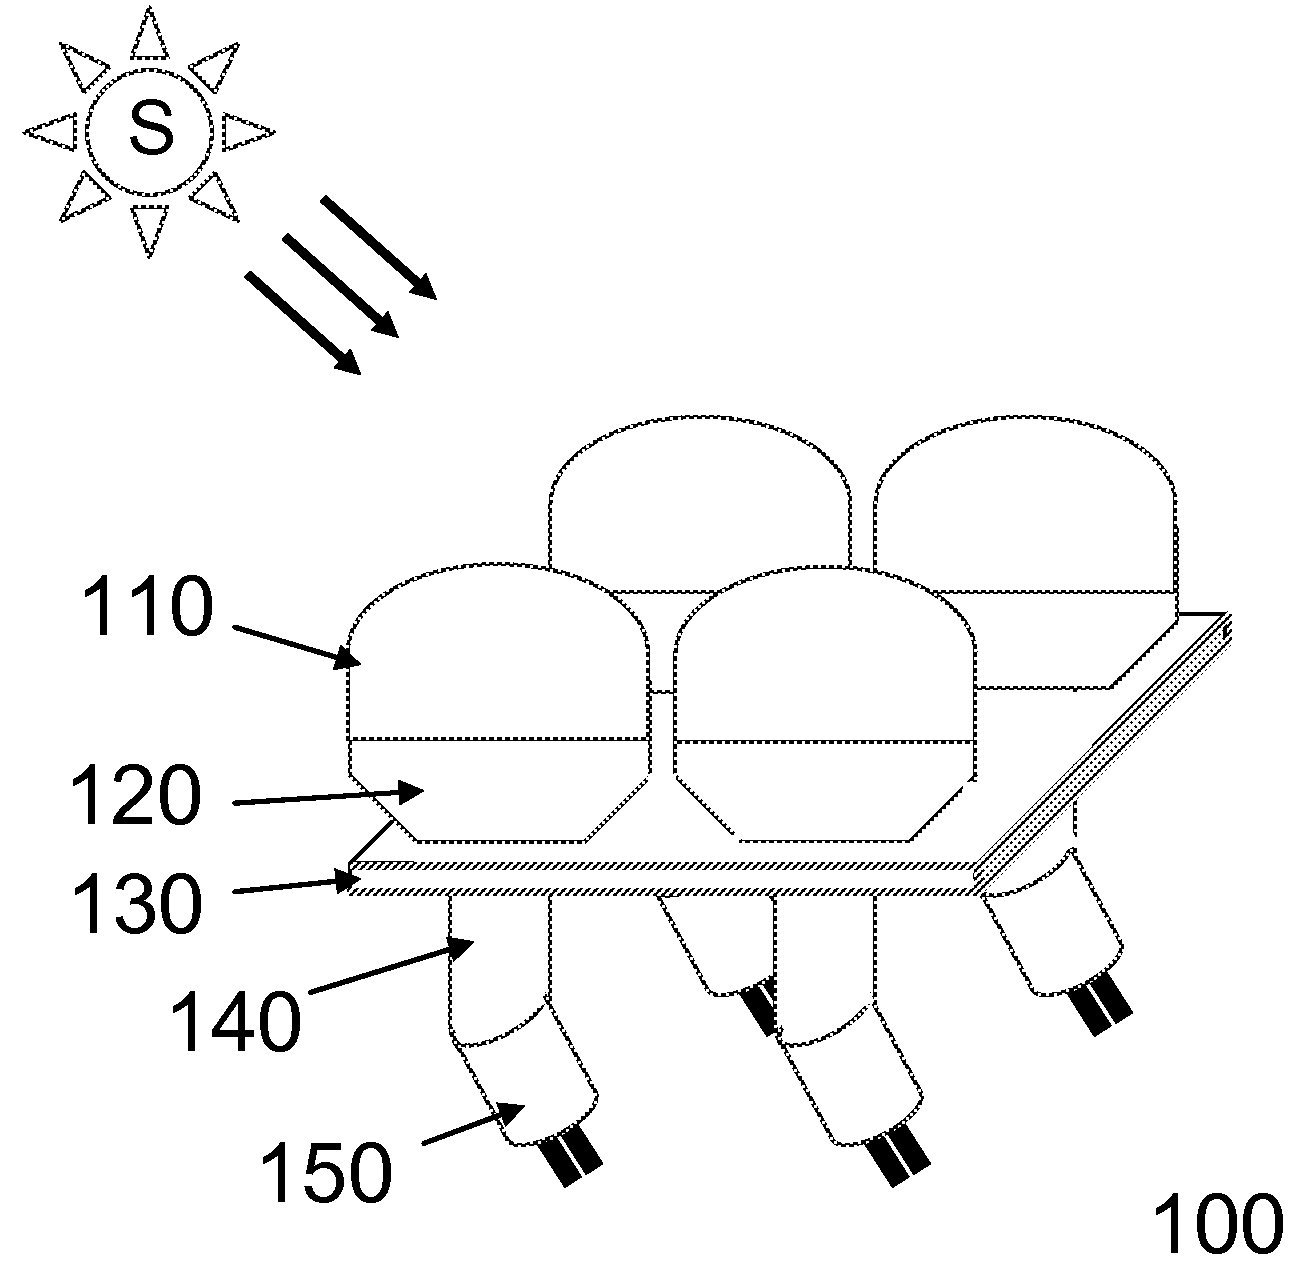 Solar-To-Electricity Conversion System Using Cascaded Architecture of Photovoltaic and Thermoelectric Devices